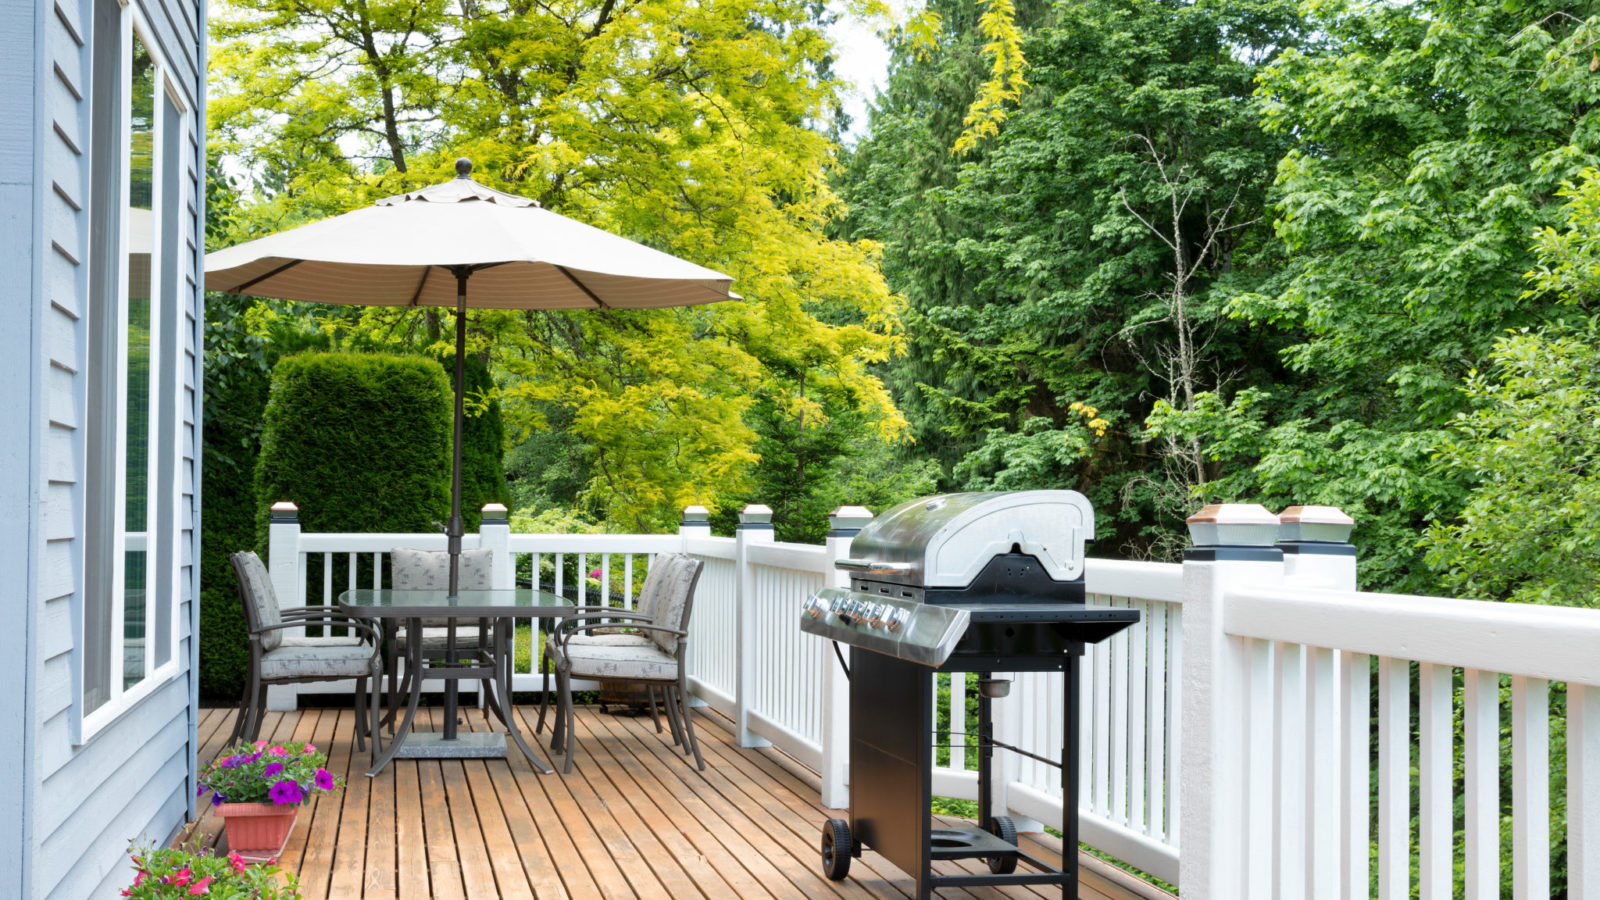 Wood deck with a grill and table